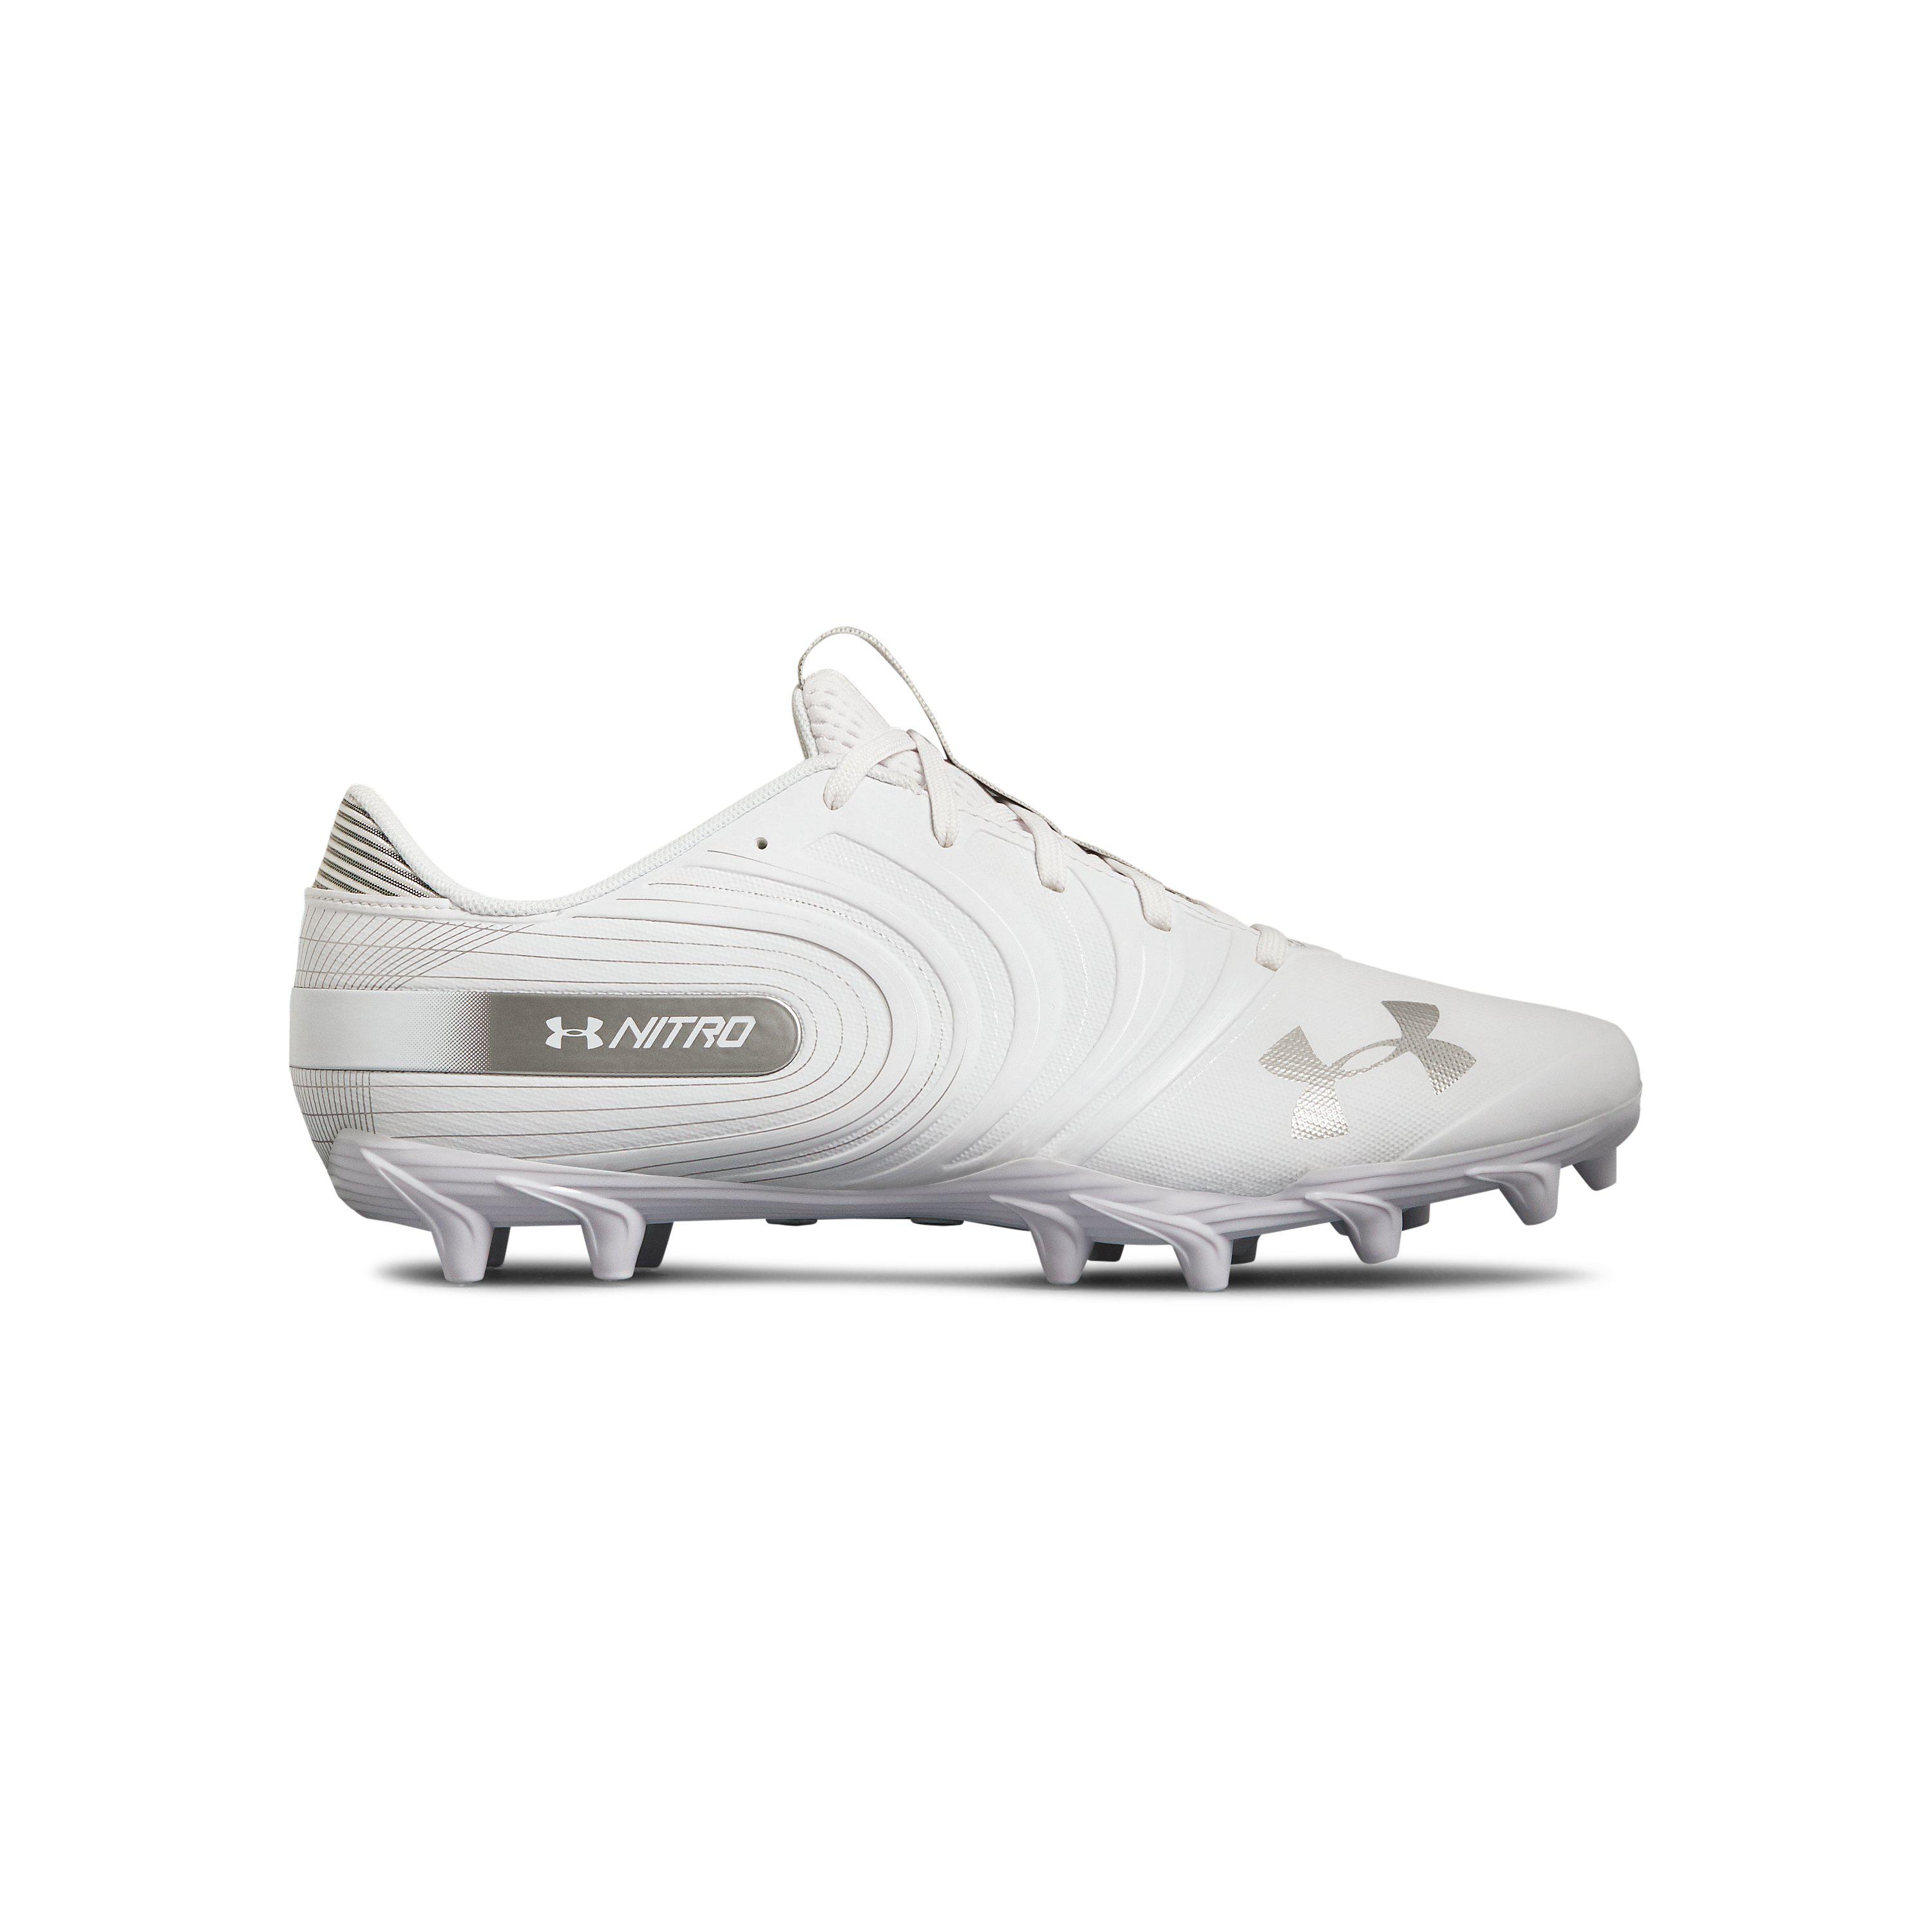 Details about   Under Armour Football Cleats Men's Nitro 3/4 Top White New 3000181-100 